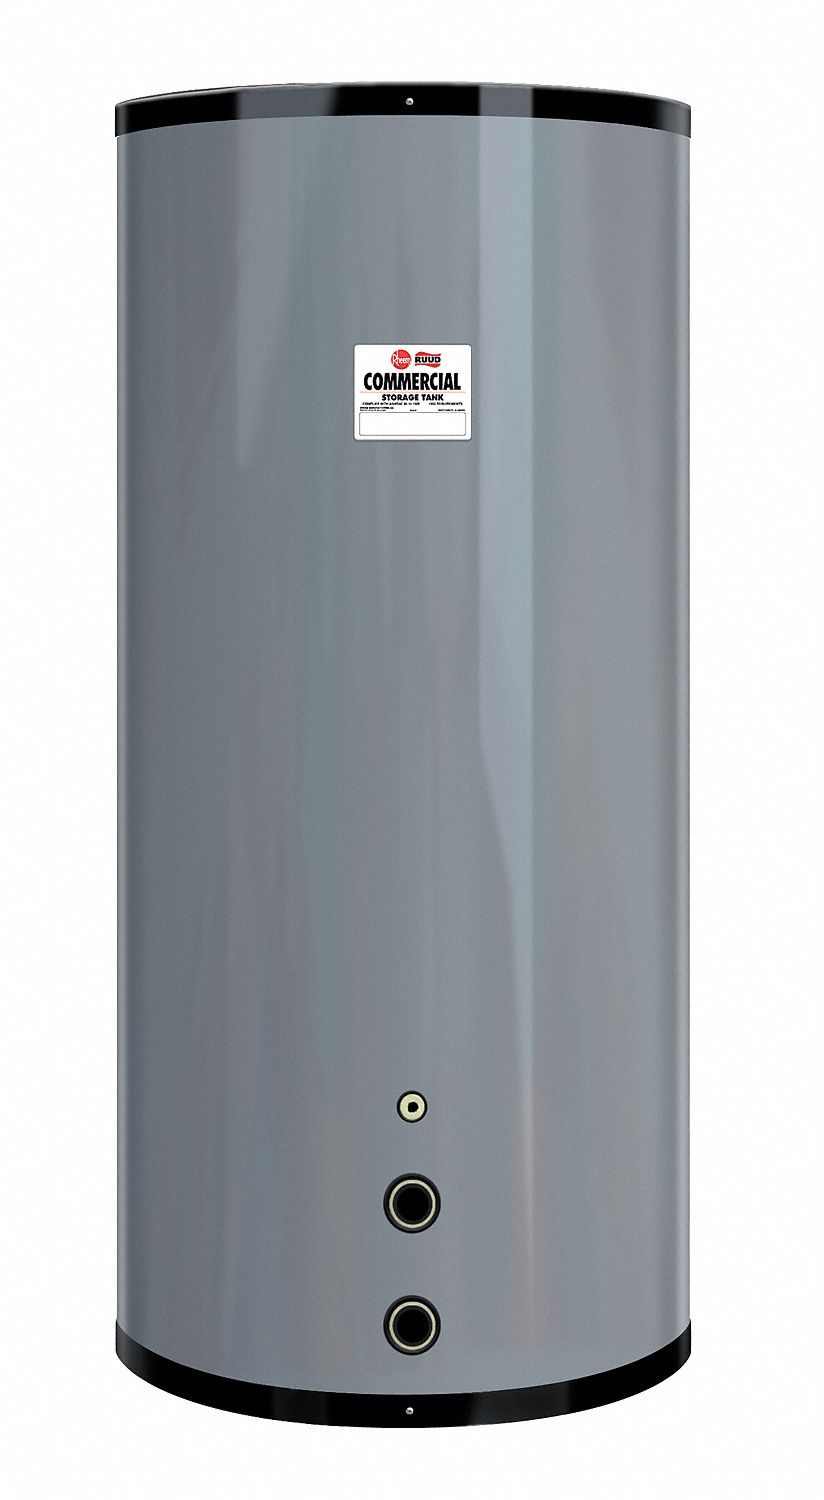 15A520 - Commercial Storage Tank 80 gal Insulated